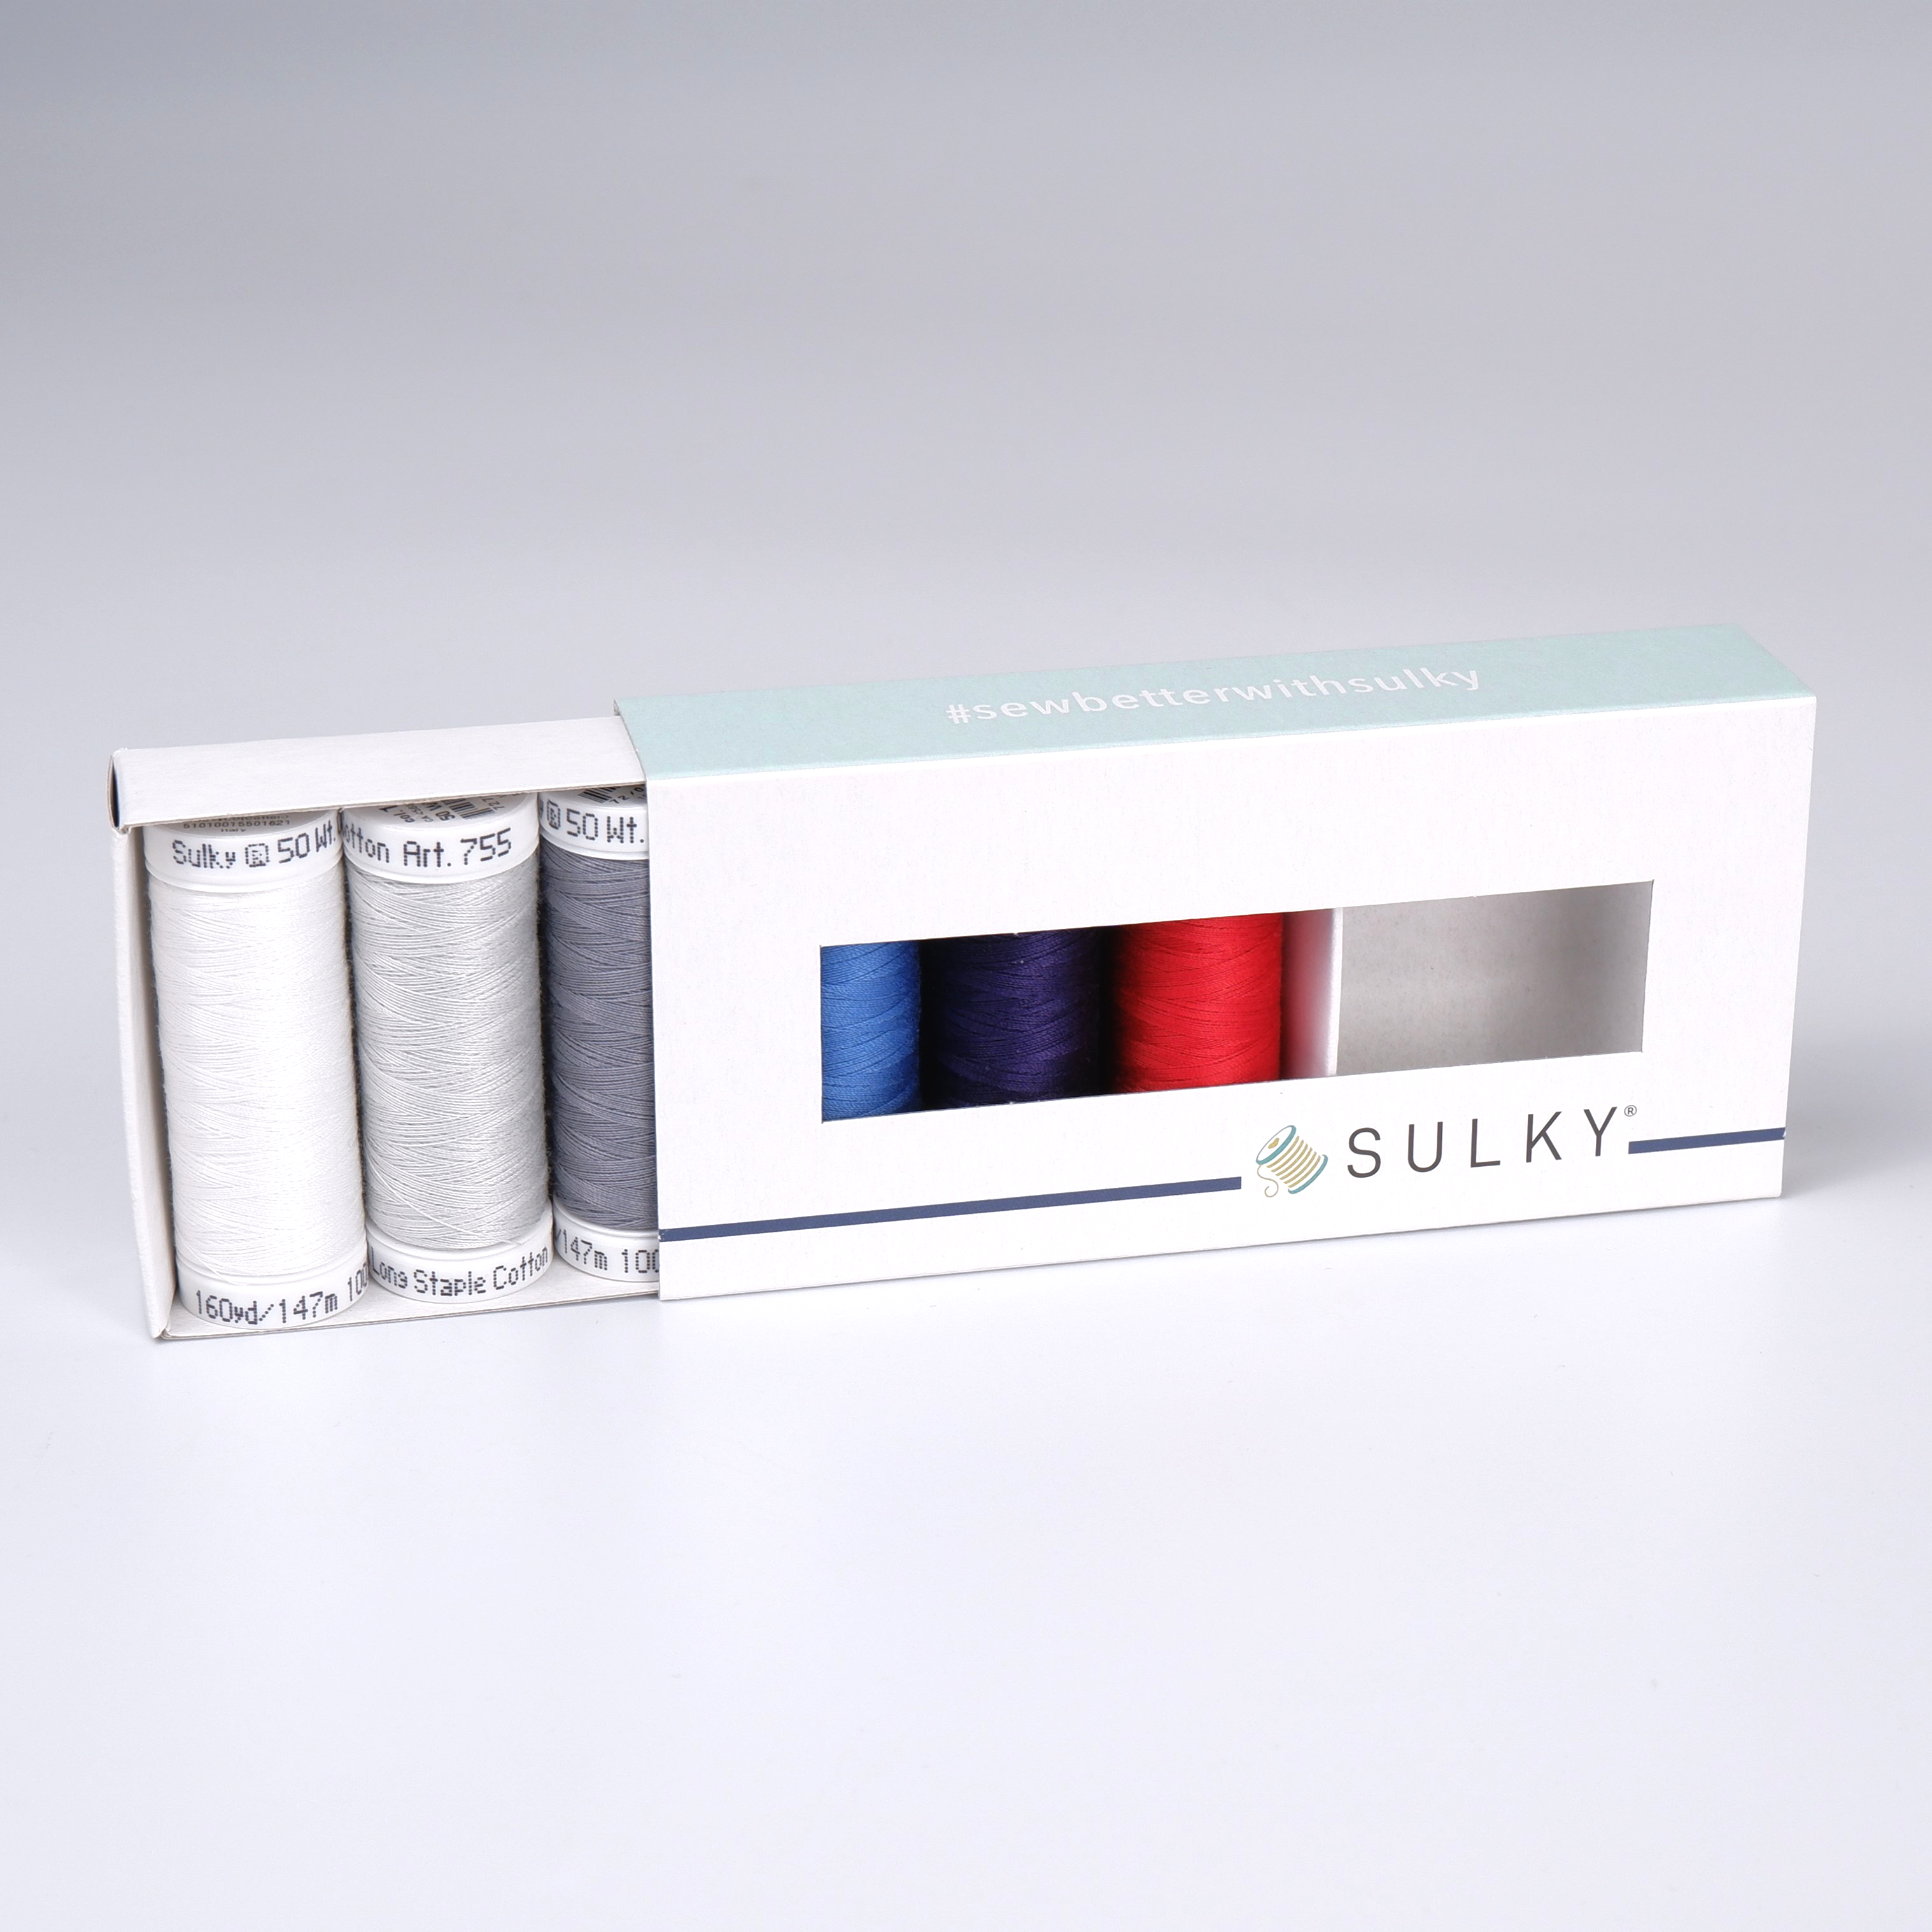 SULKY COTTON 50 - INDEPENDENCE DAY (6x
147m Snap Spools)